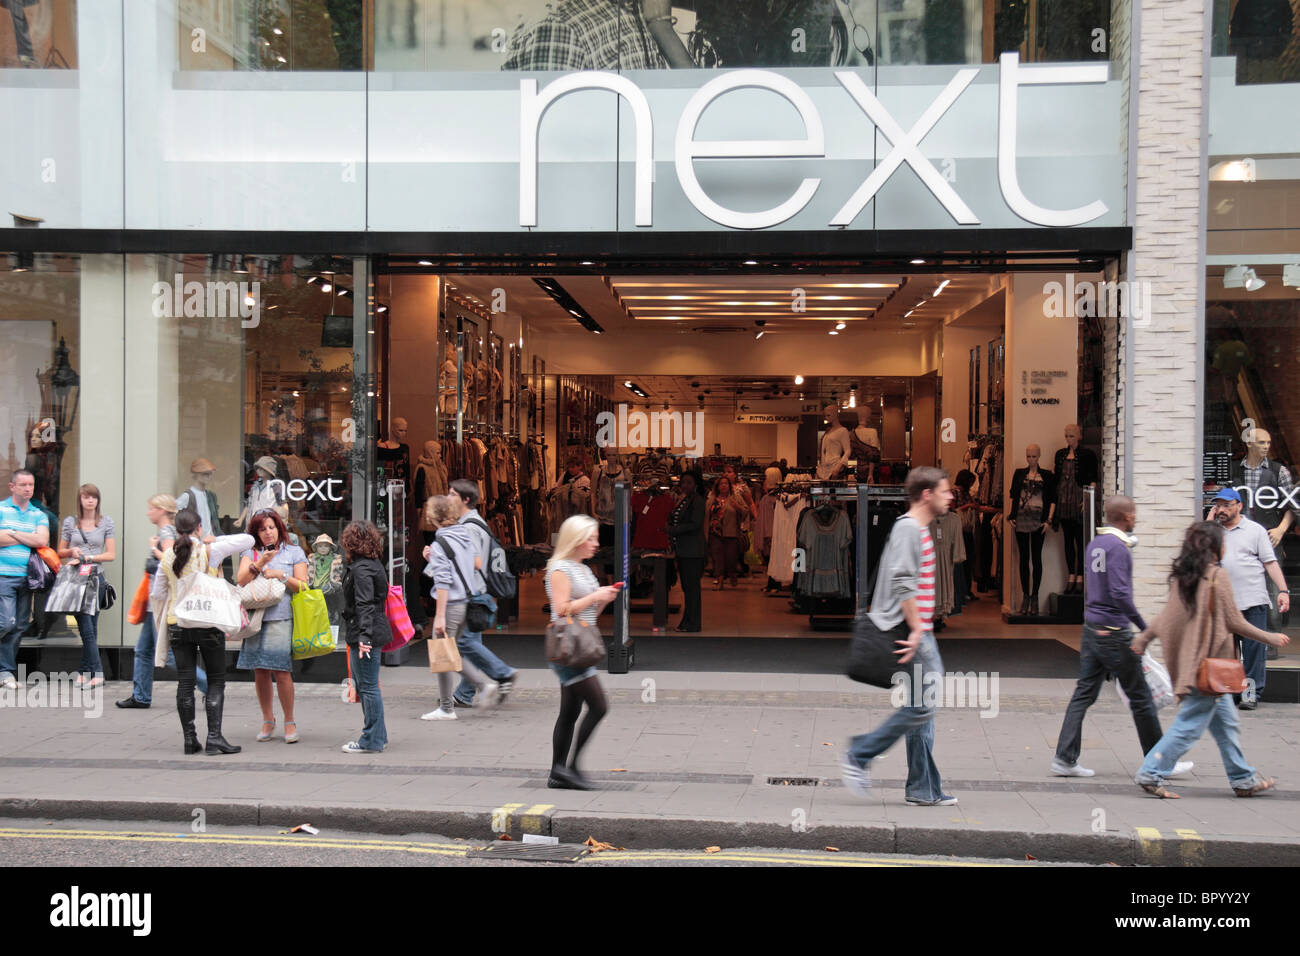 Street view of the NEXT clothing and fashion store on Oxford Street, London, UK. Stock Photo